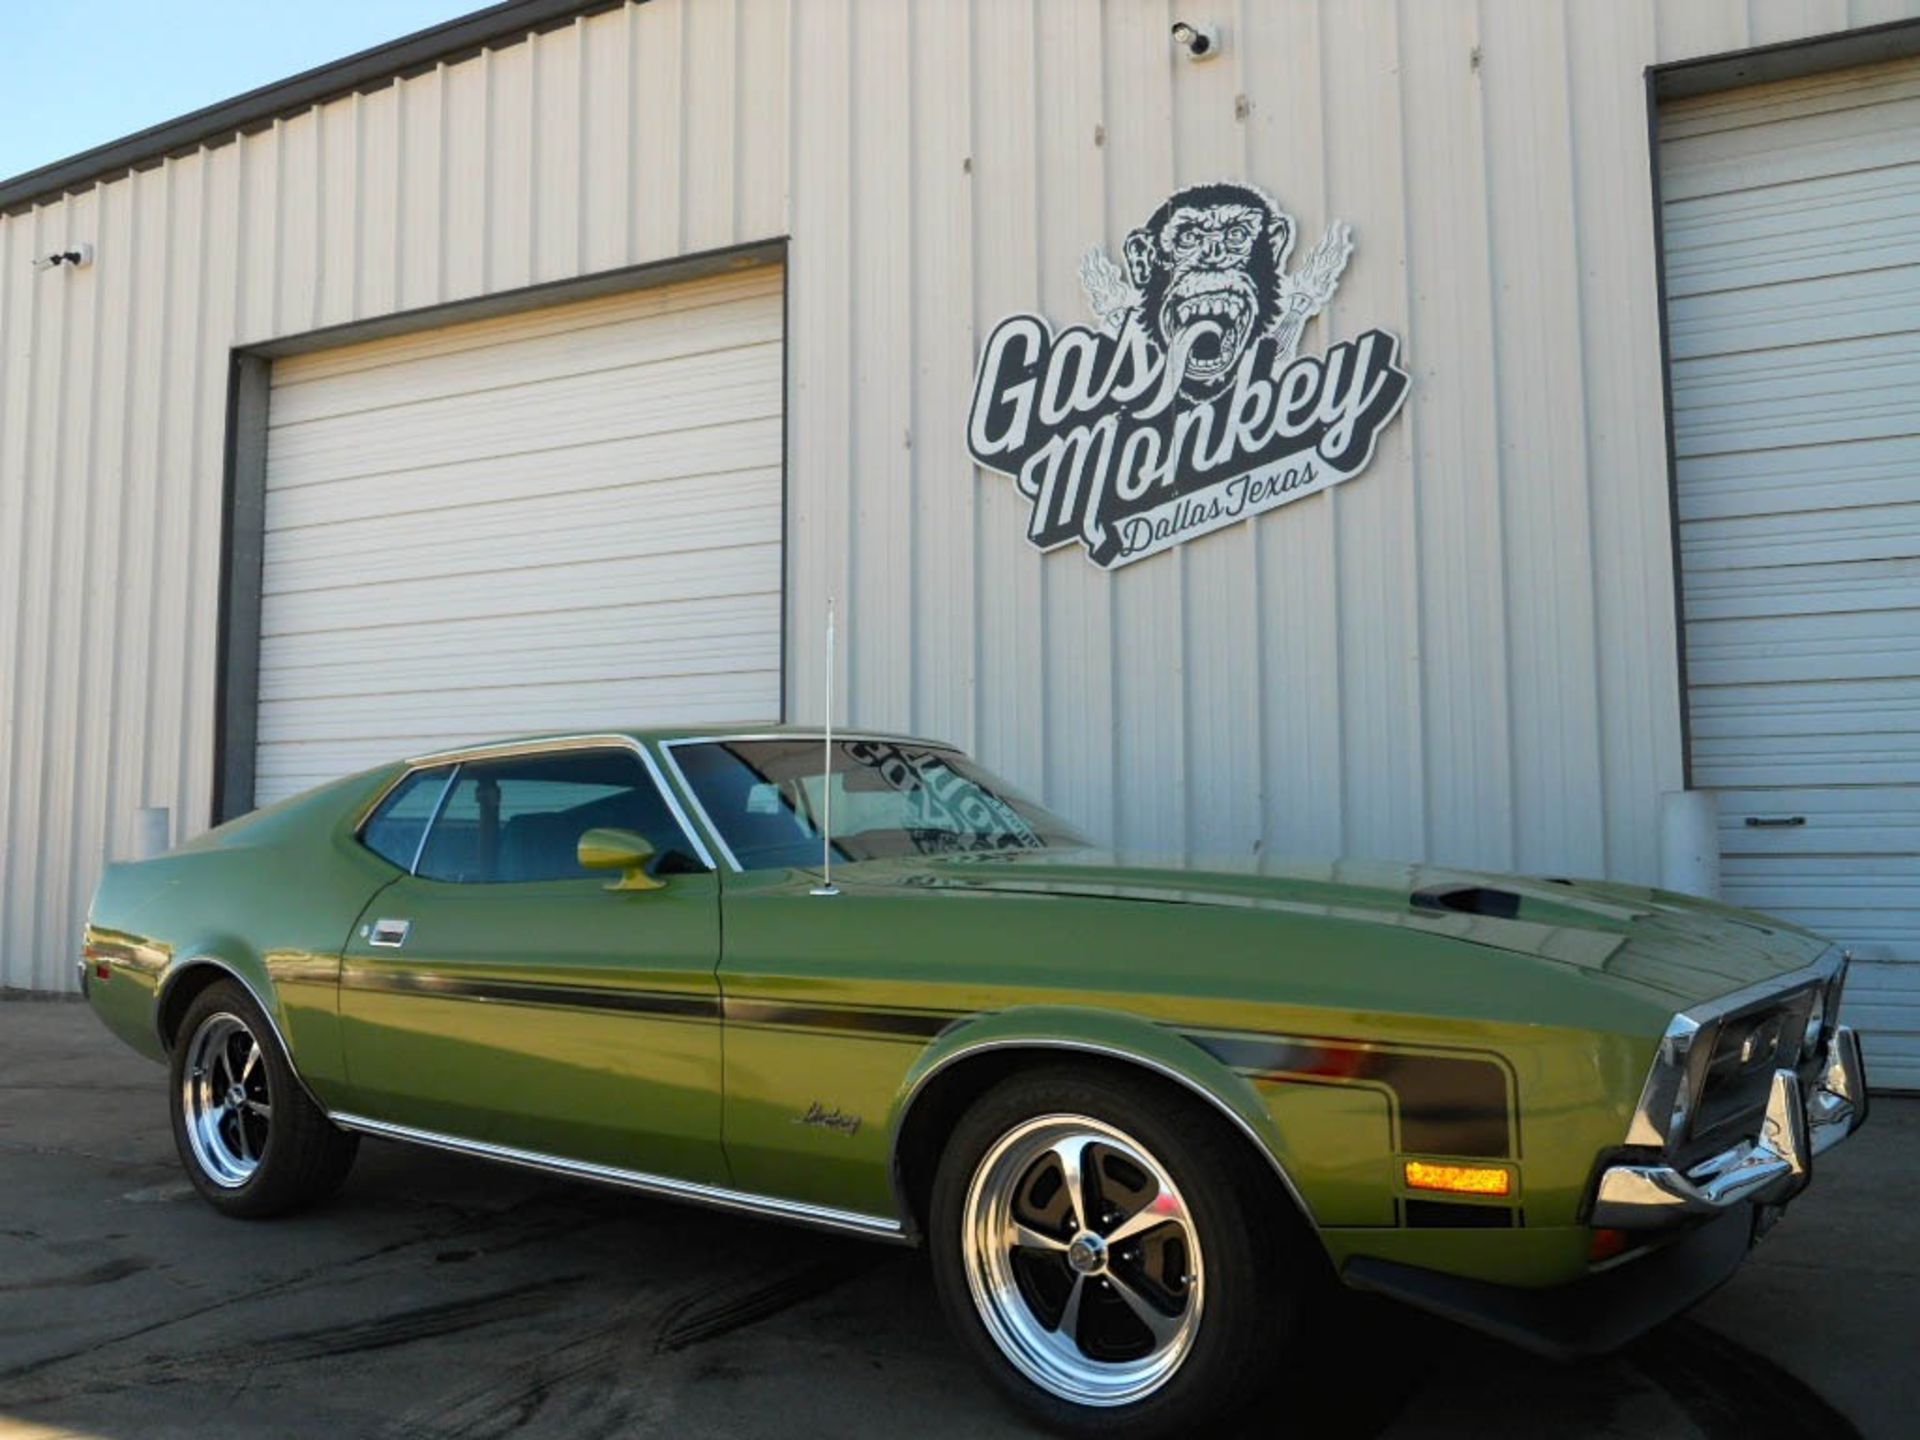 1972 Ford Mustang Fastback 302 V8 Automatic “Resto-Mod” undertaken by 'Gas Monkey' Garage